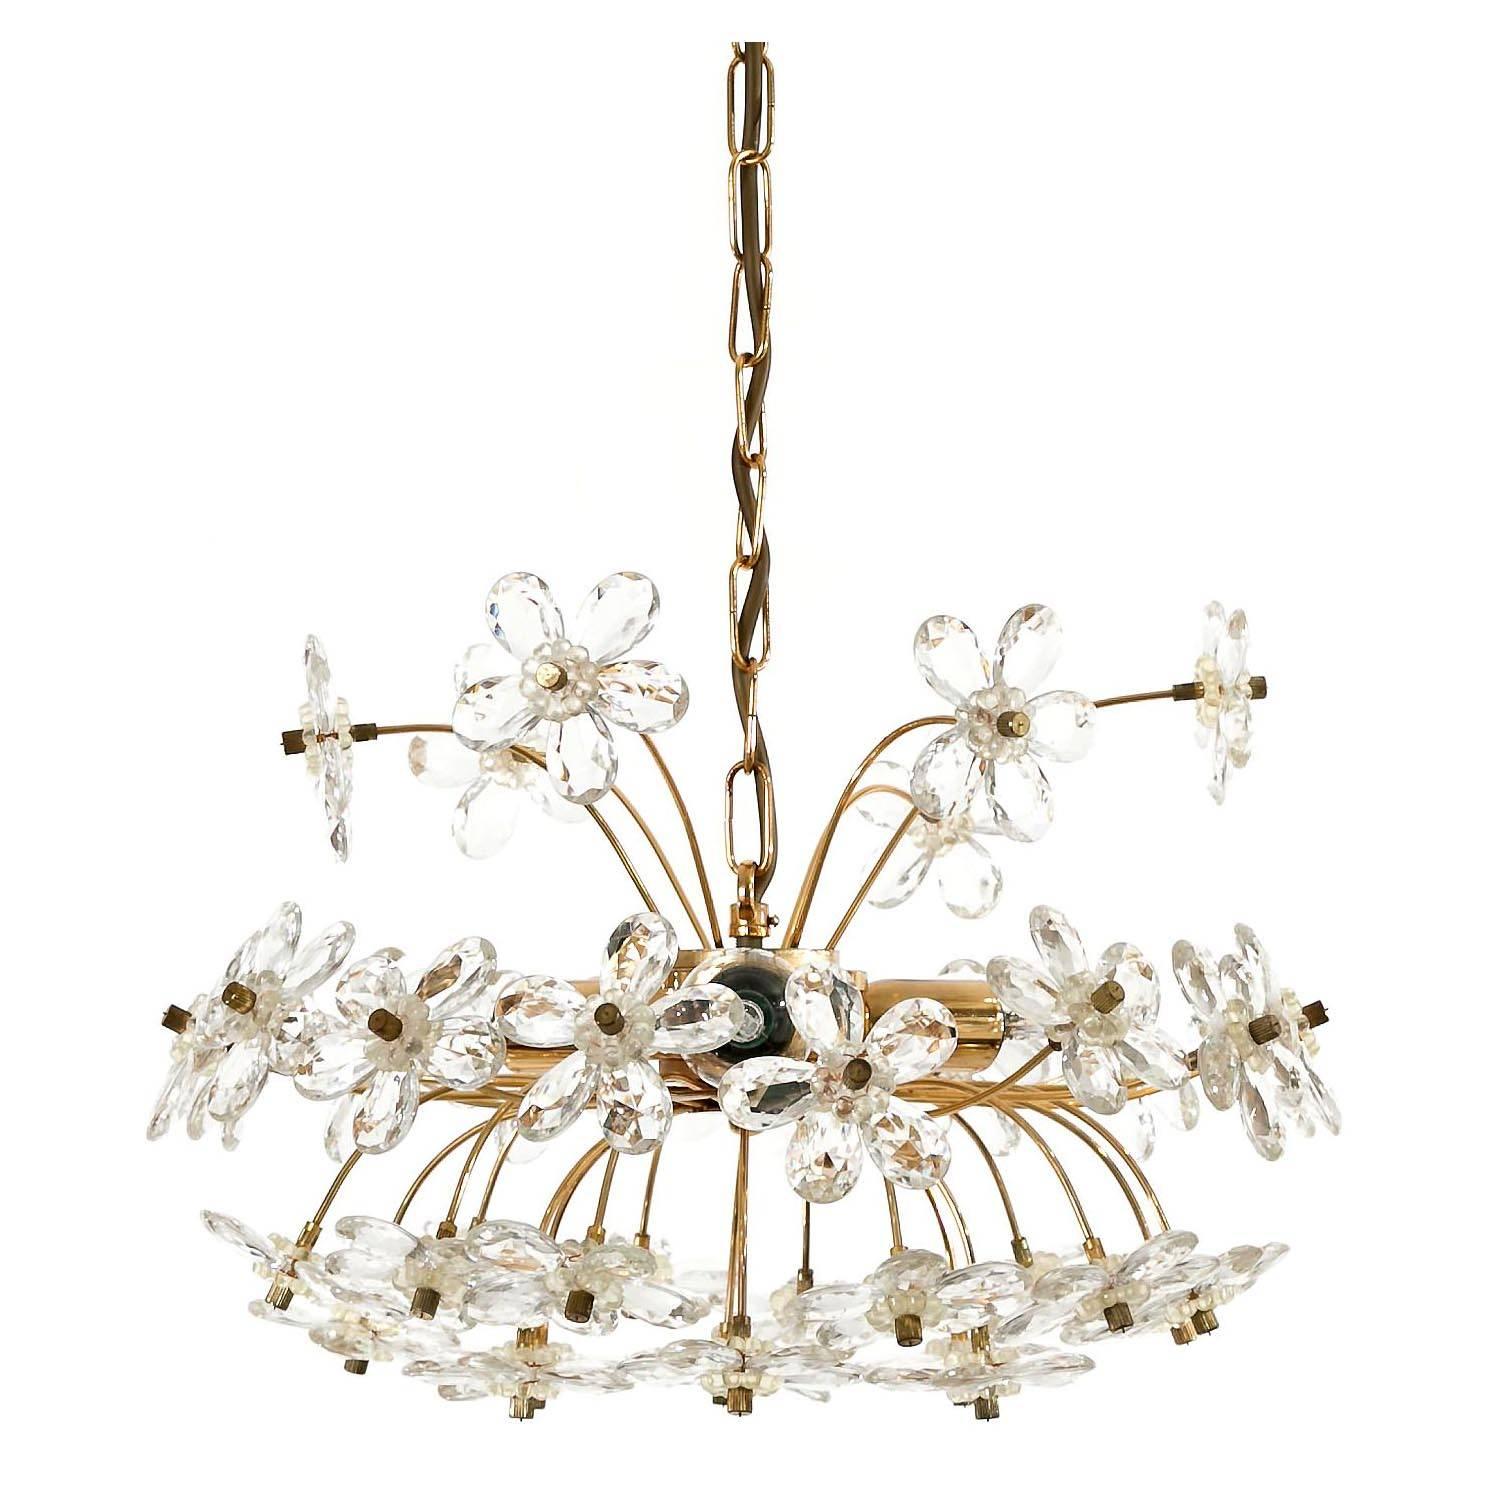 A beautiful floral pendant light with crystal bloomies from Italy, 1960s. Nice patina on brass. The chain can be altered to any length for free. A wider and flatter US canopy (5" W x 1" H) can be provided.

Body of fixture: 16" (40